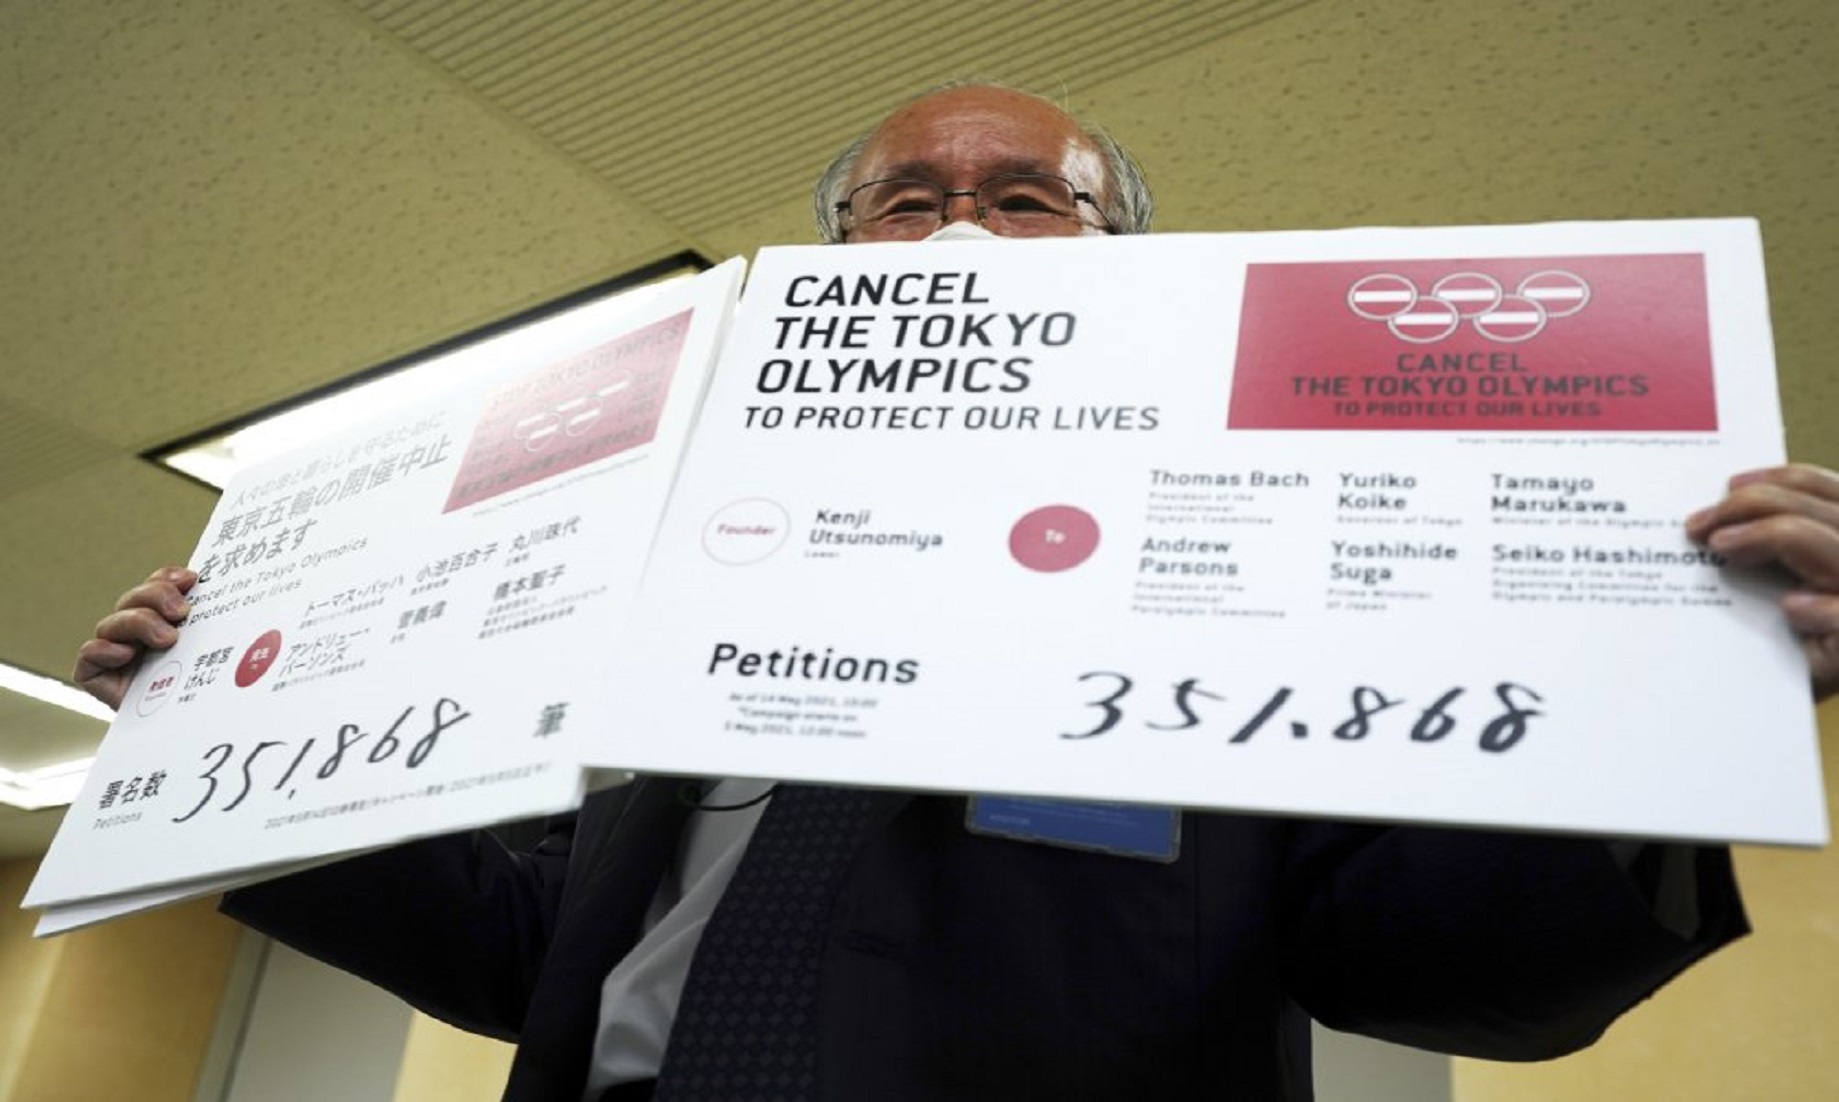 Japanese Lawyer Implores Tokyo To Cancel Olympics, More Than 350,000 Sign Petition